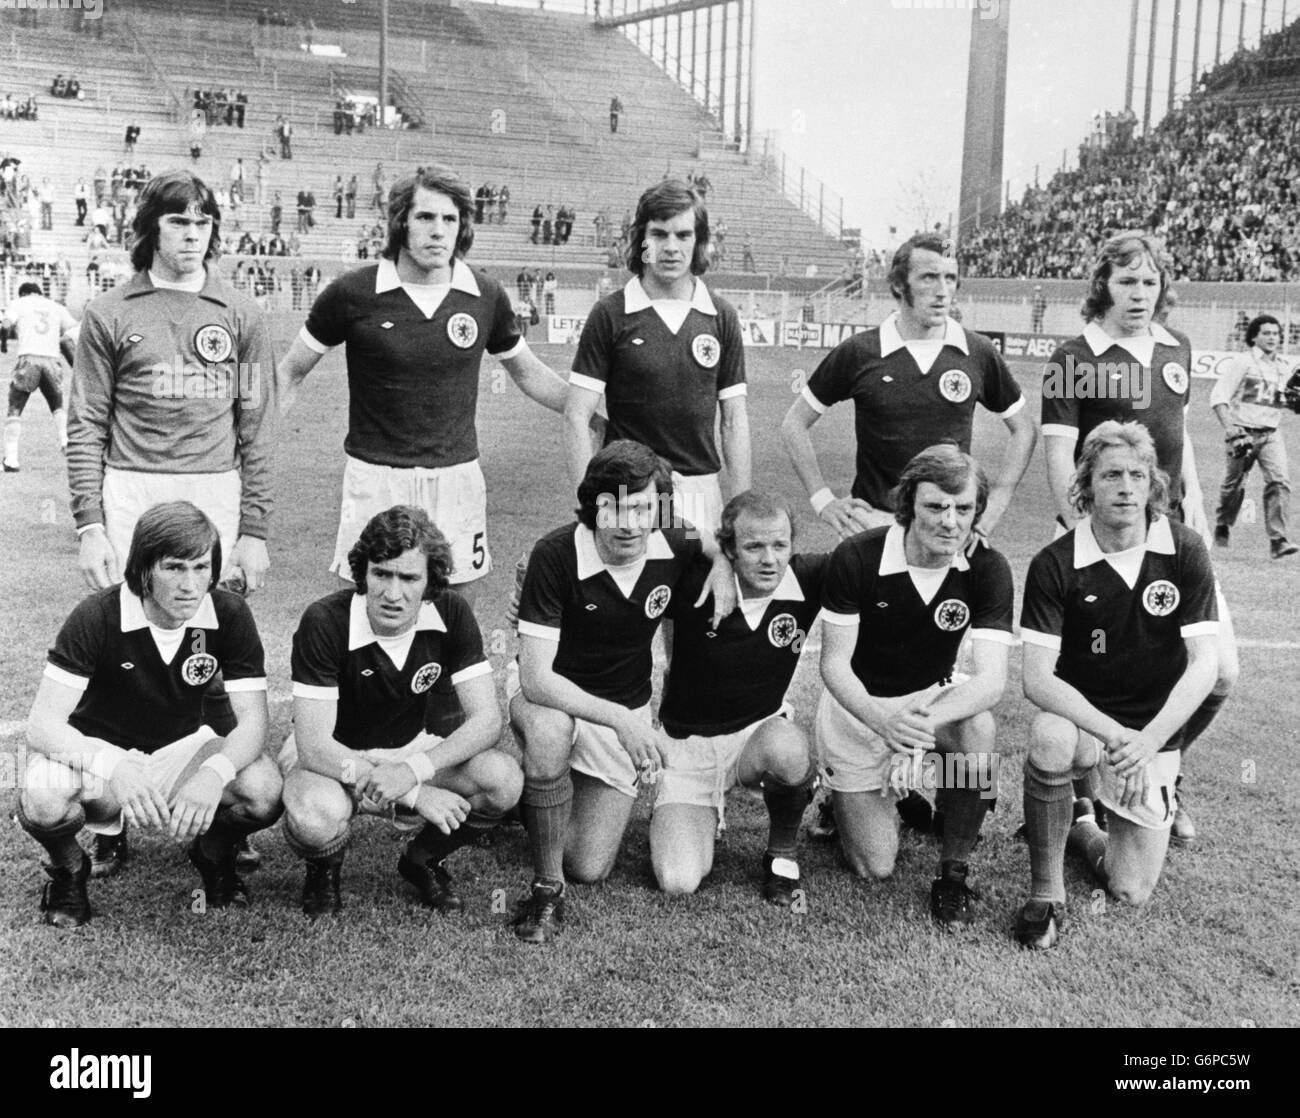 The Scotland team before the Group Two World Cup match against Zaire at the Westfalenstadion in Dortmund. (Back row, l-r) David Harvey, Jim Holton, Joe Jordan, Danny McGrain and John Blackley. (Front row, l-r) Kenny Dalglish, Sandy Jardine, Peter Lorimer, Billy Bremner, David Hay and Denis Law. Stock Photo